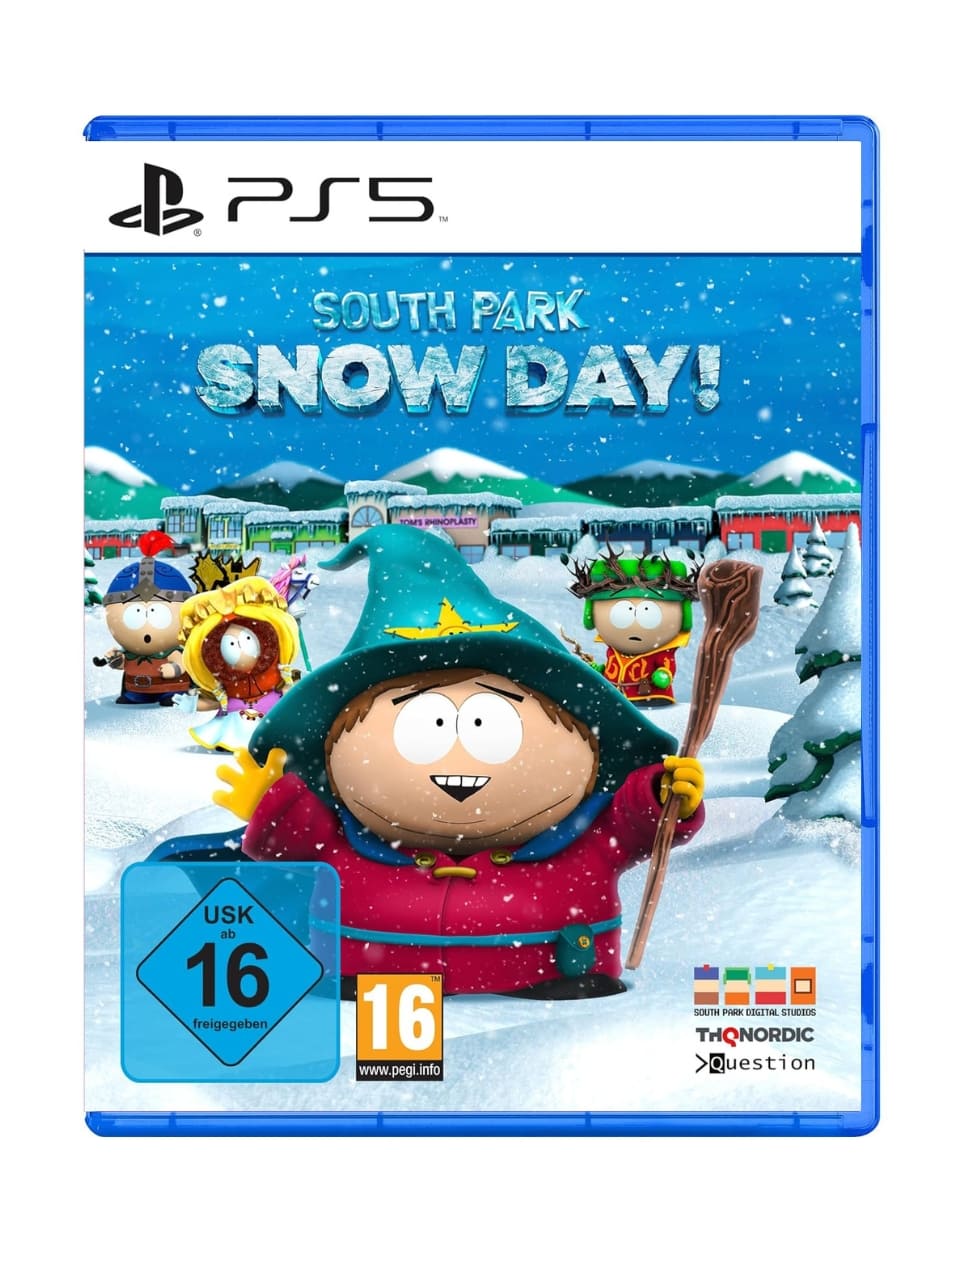 South Park: Snow Day! - PlayStation 5/PS5